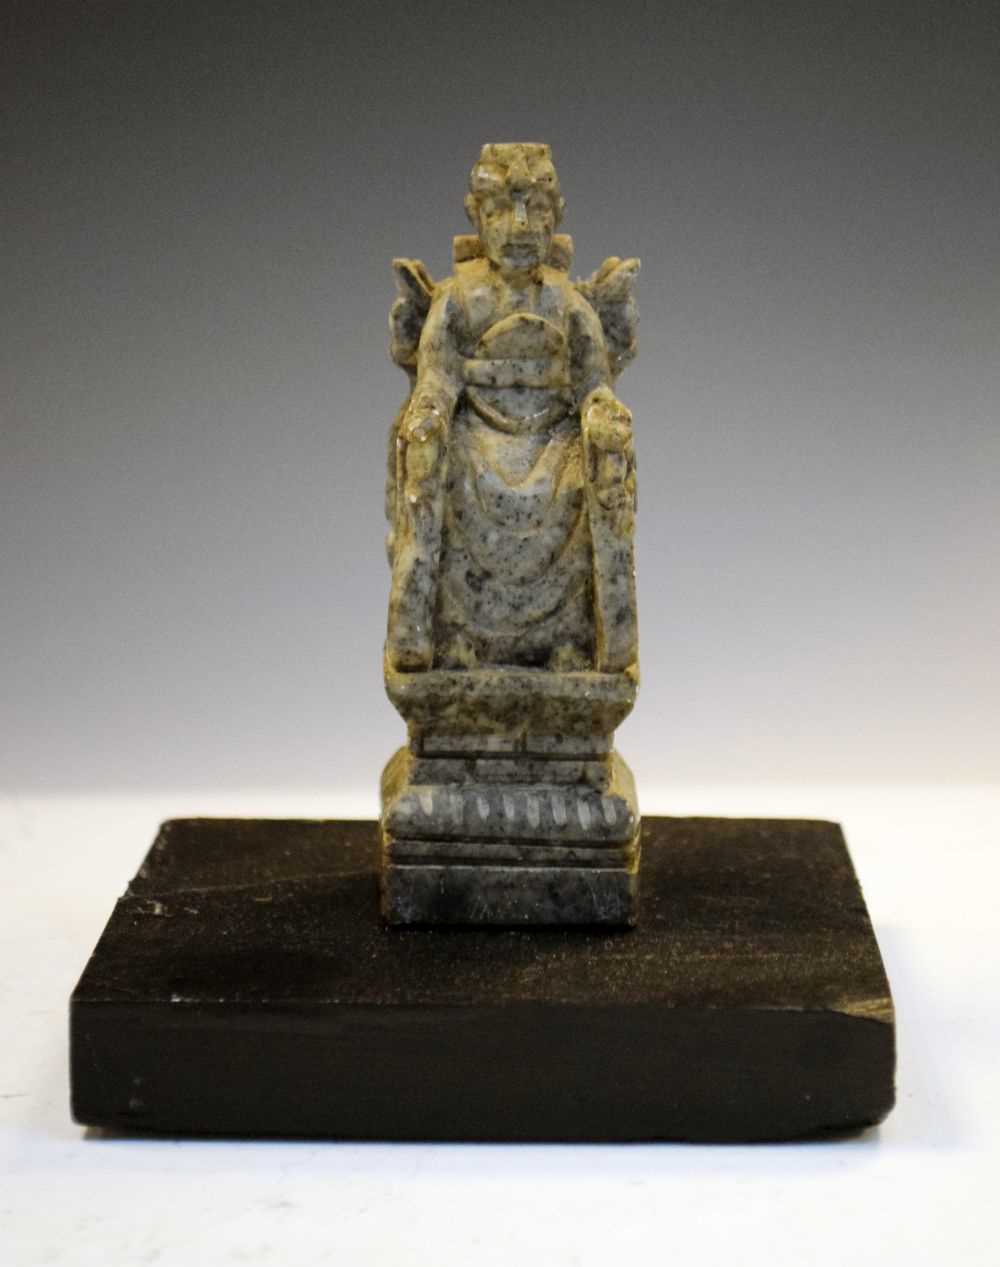 Carved soapstone seated figure